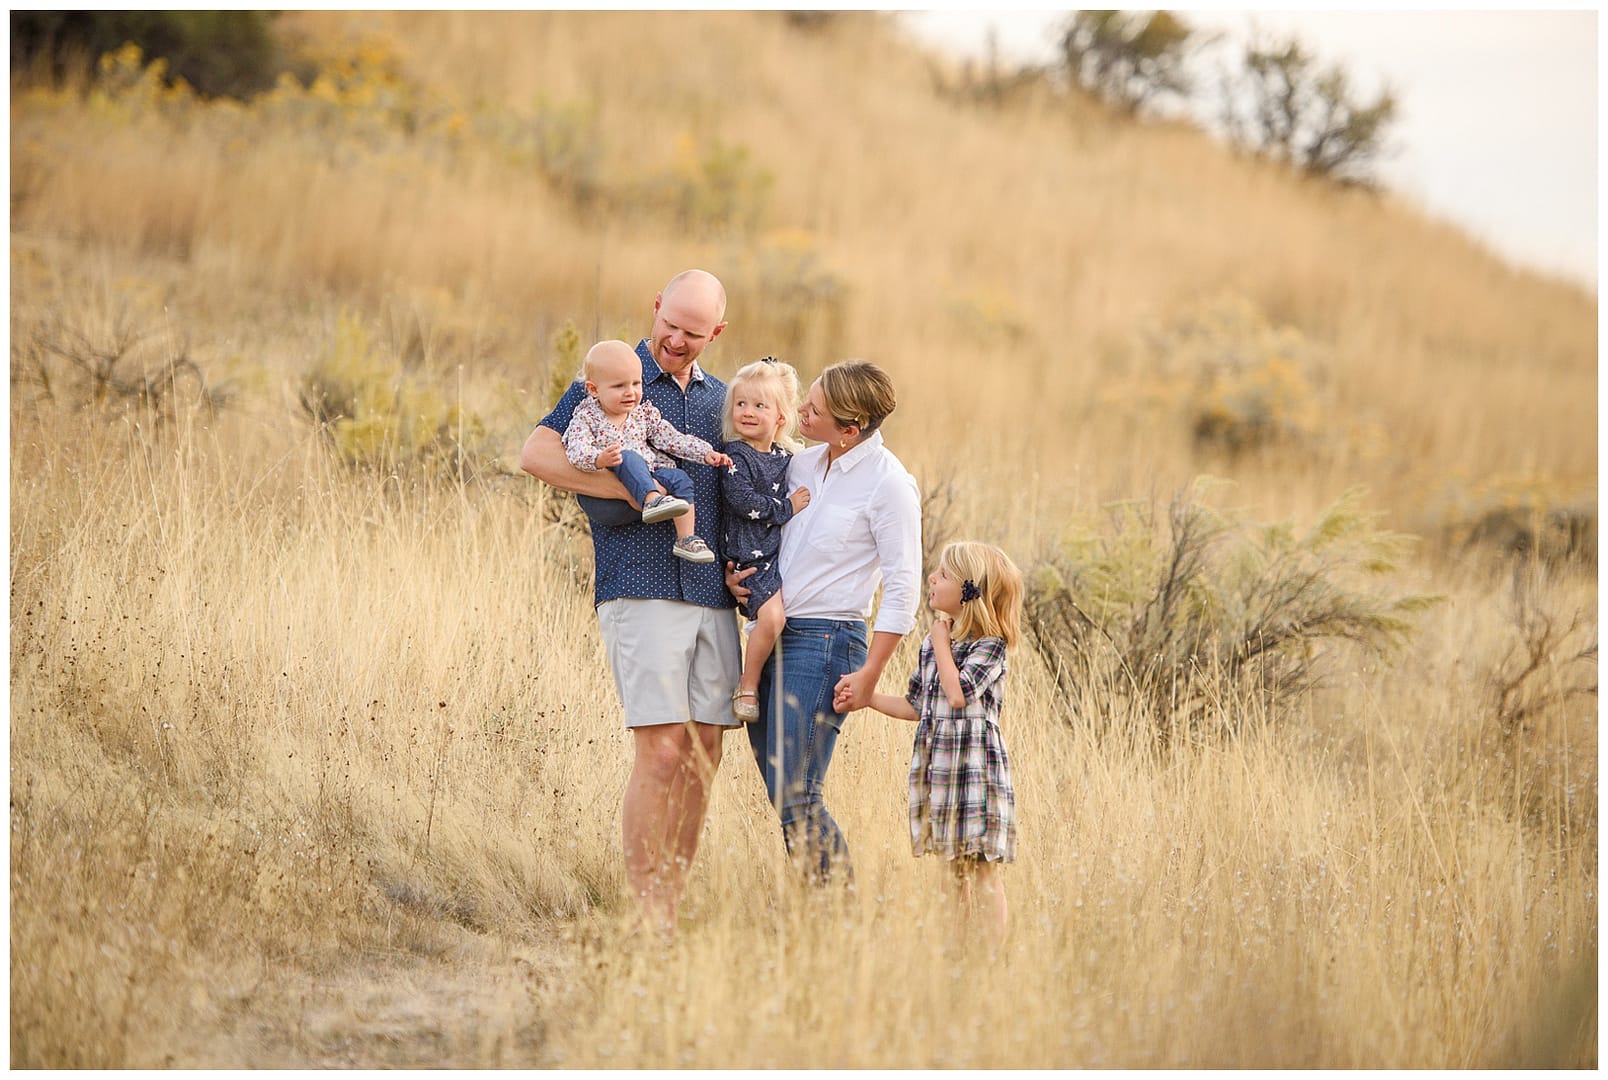 Boise family plays in the foothills. Photo by Tiffany Hix Photography.